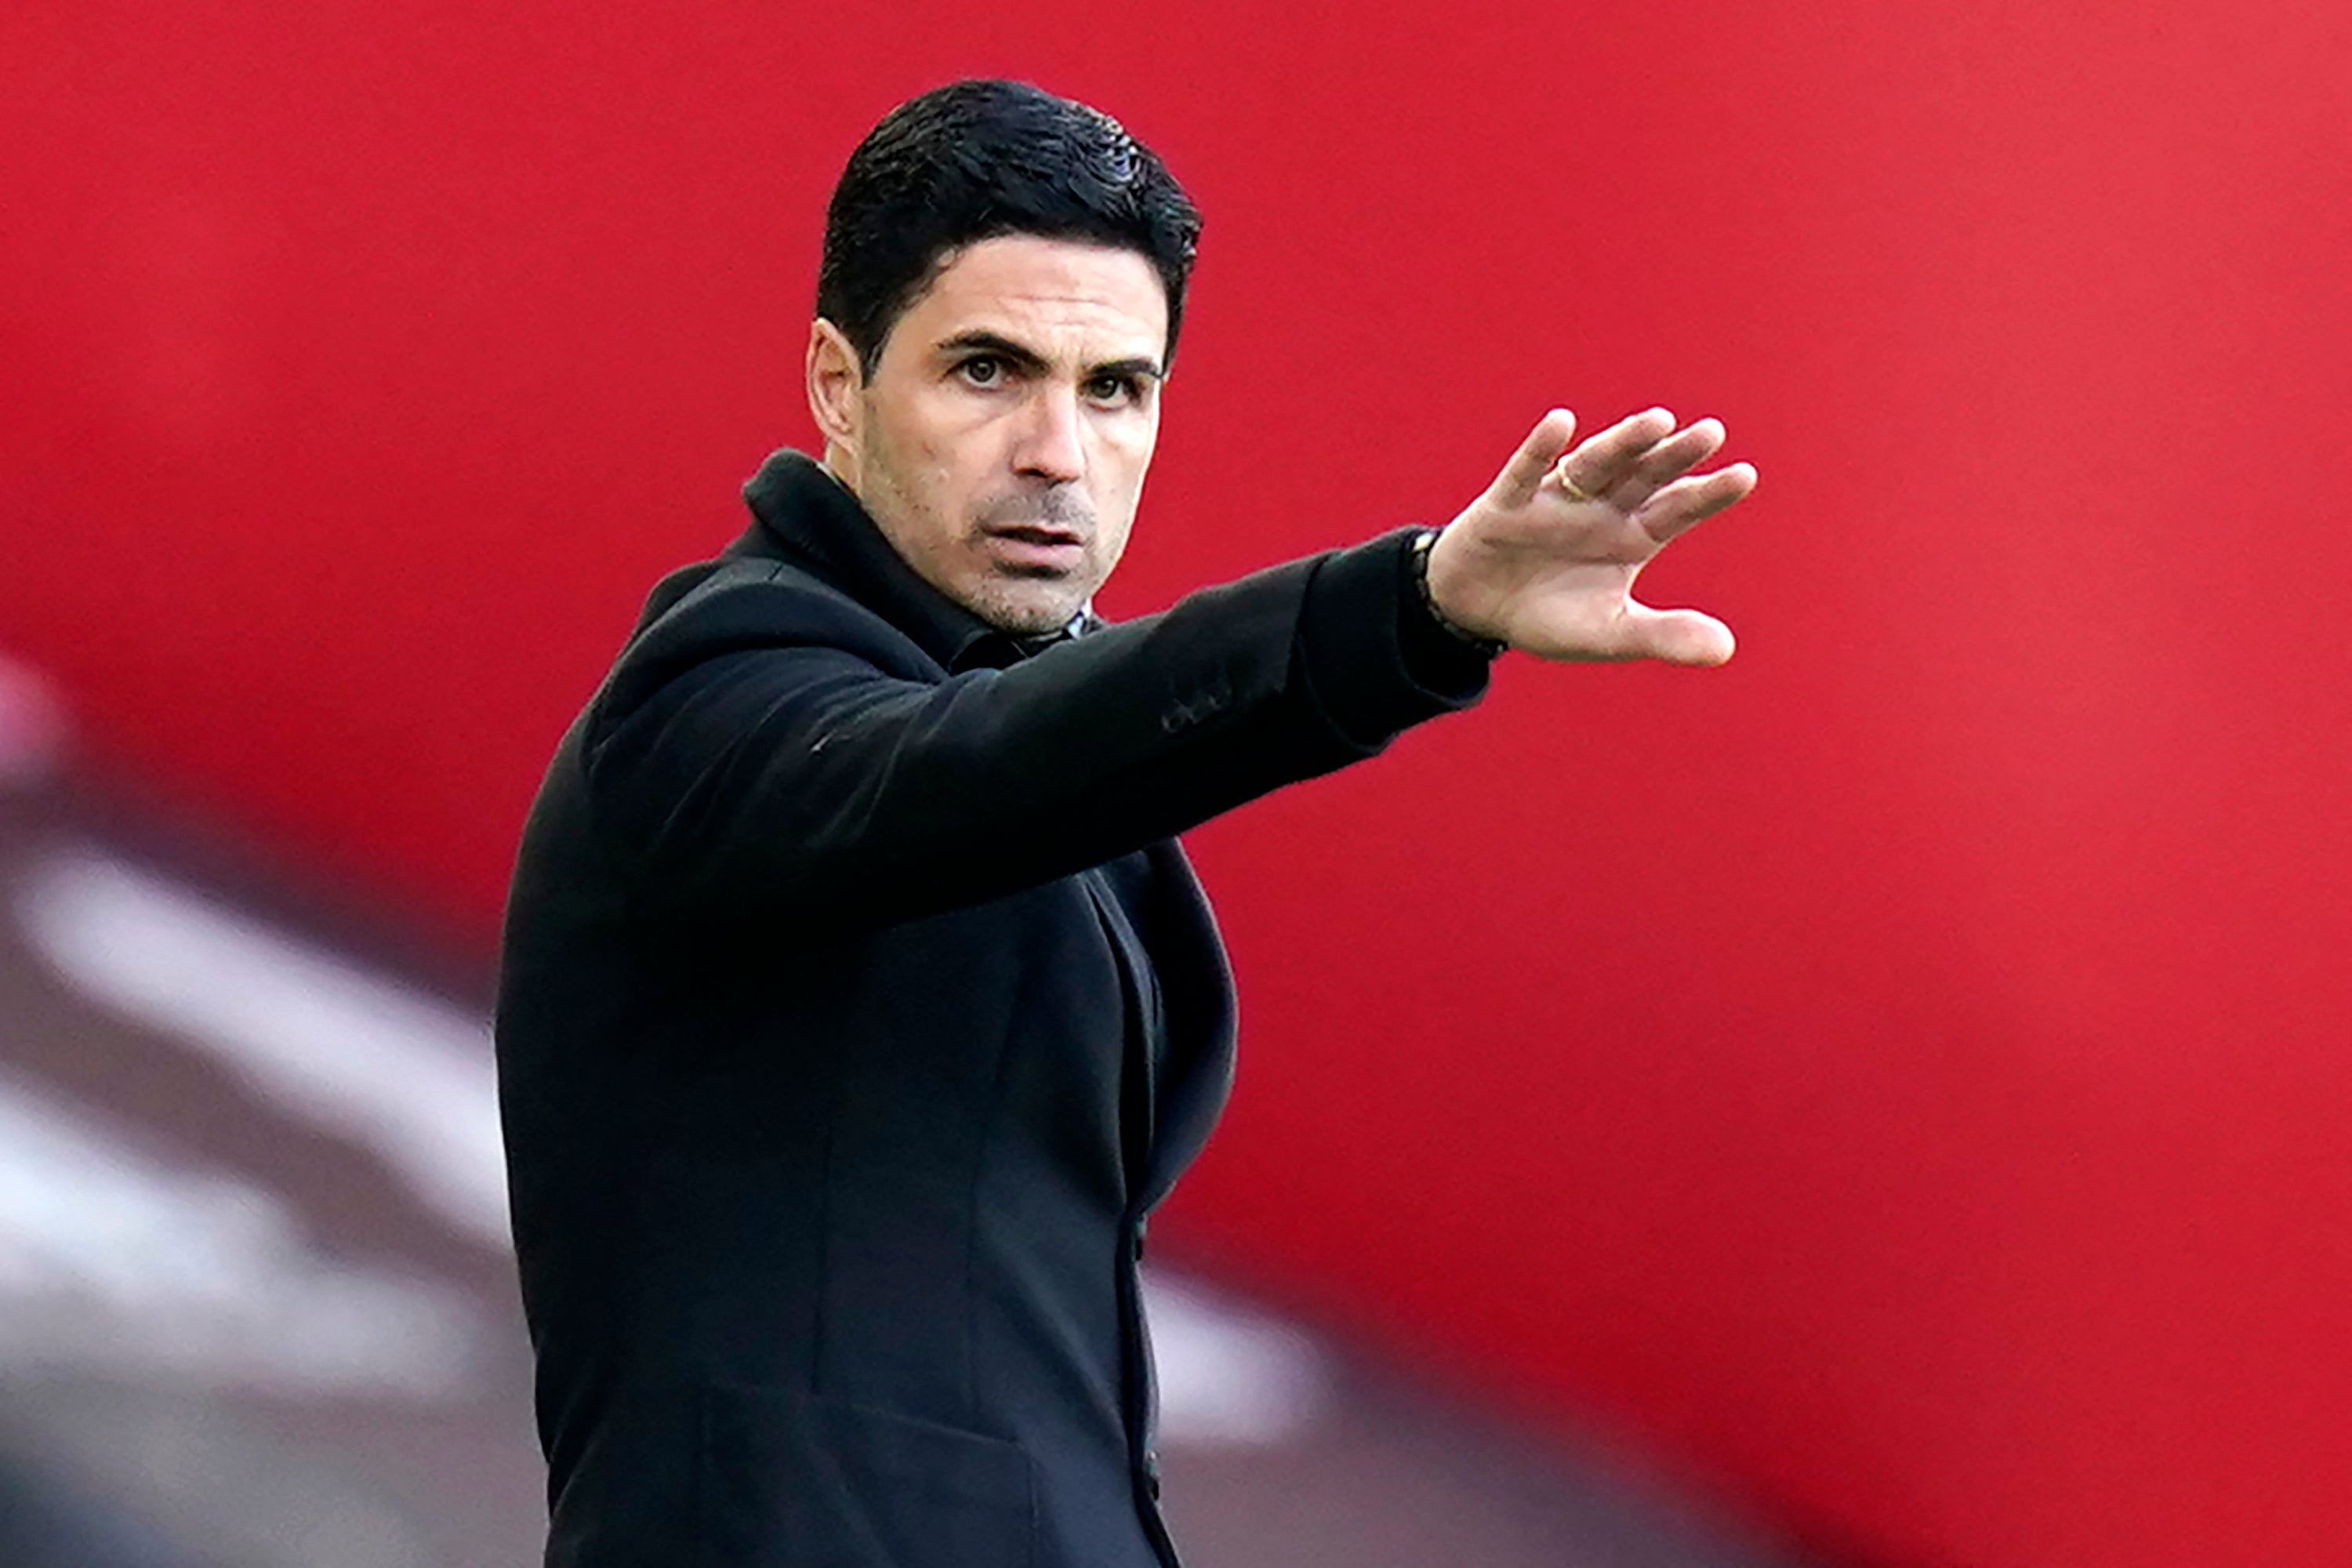 Arsenal manager Mikel Arteta praised the response of football fans in their opposition to the Super League